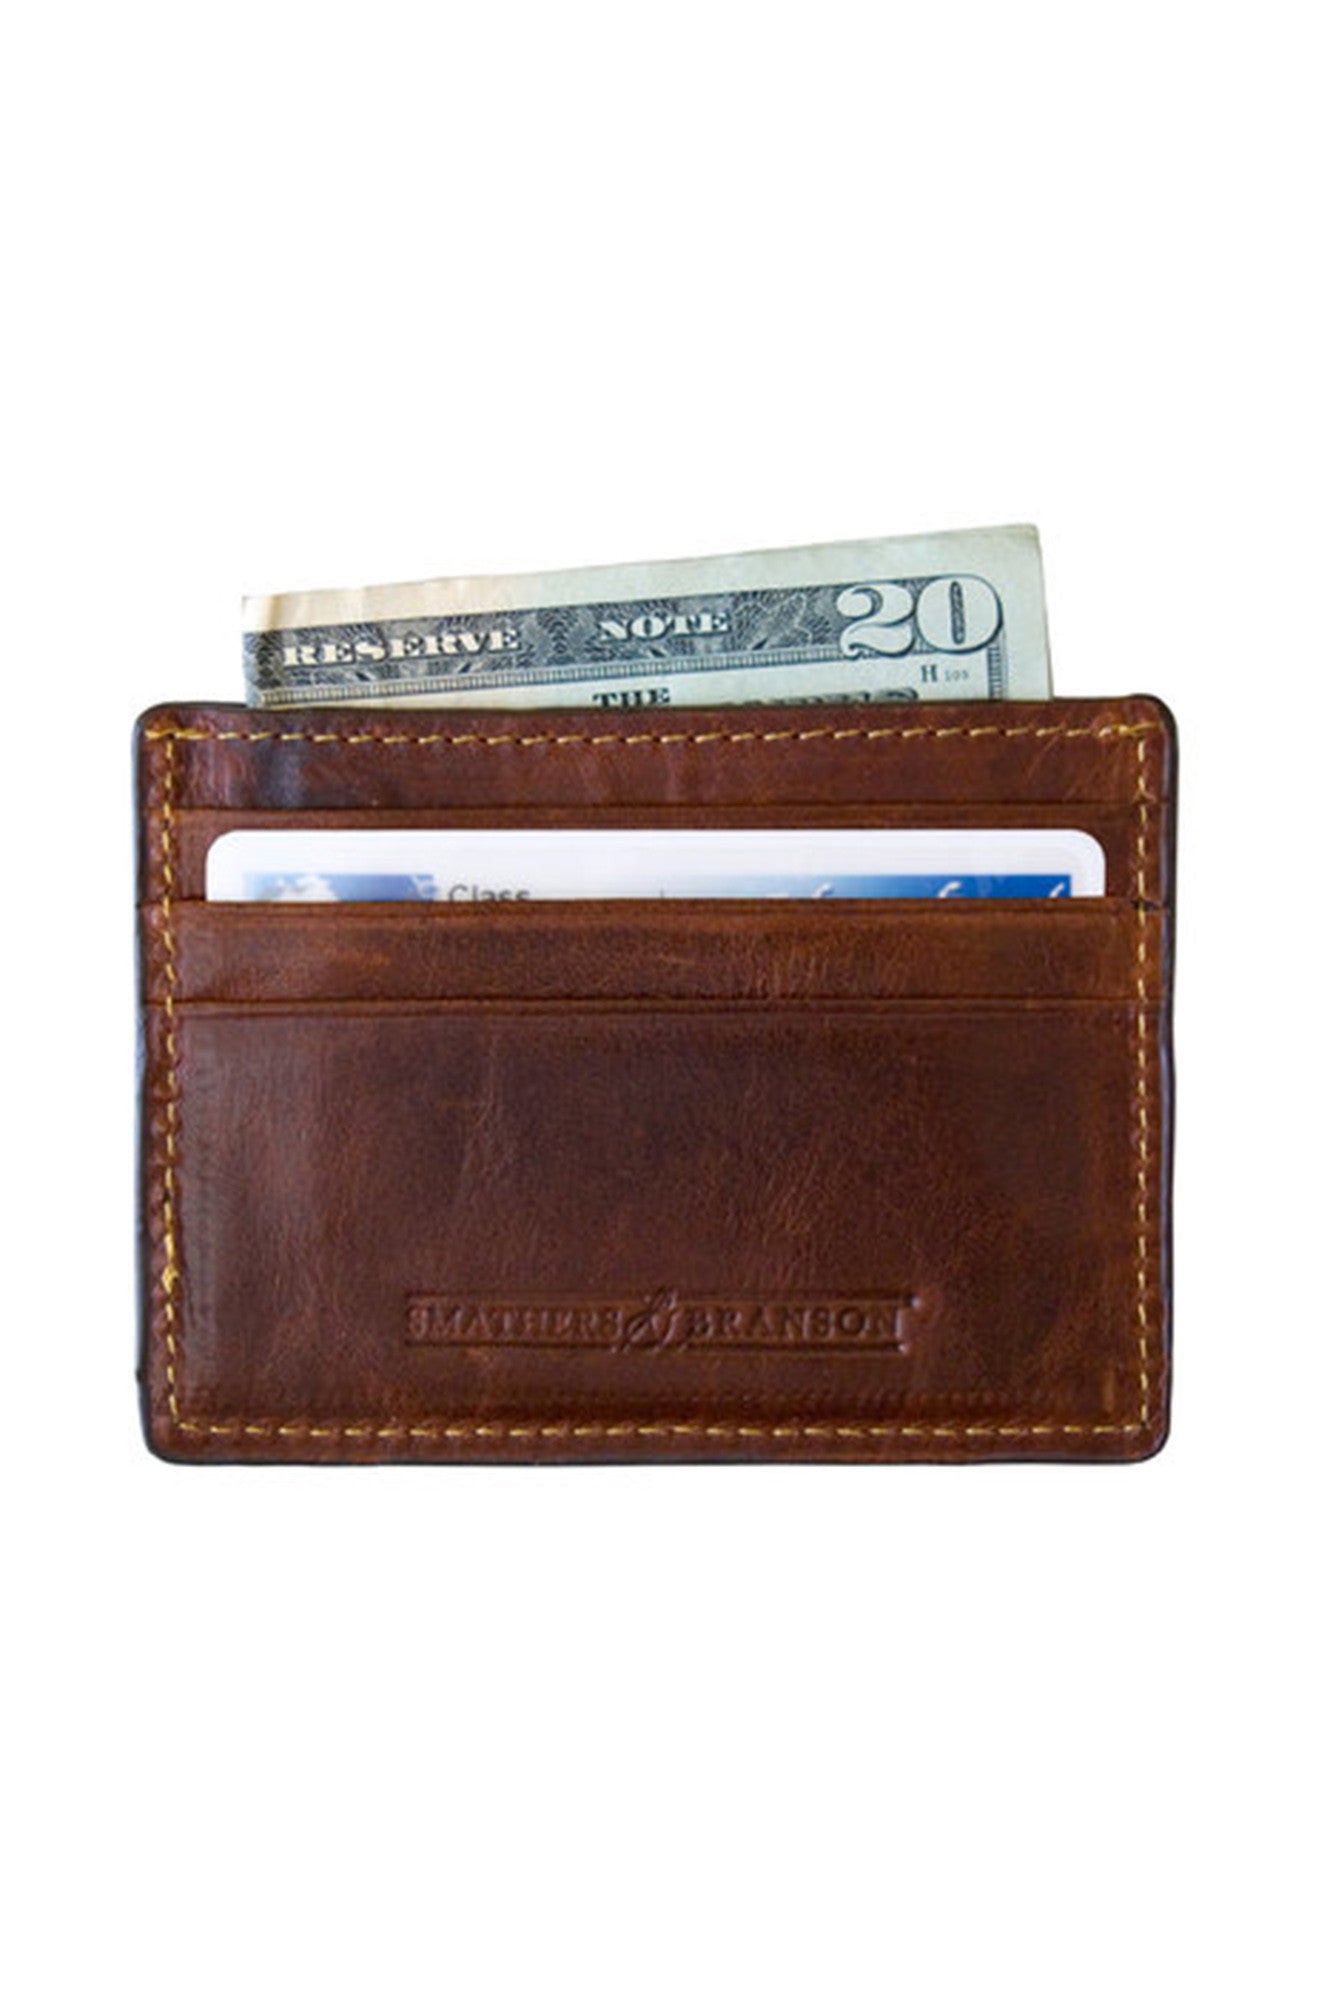 OLE MISS CREDIT CARD WALLET